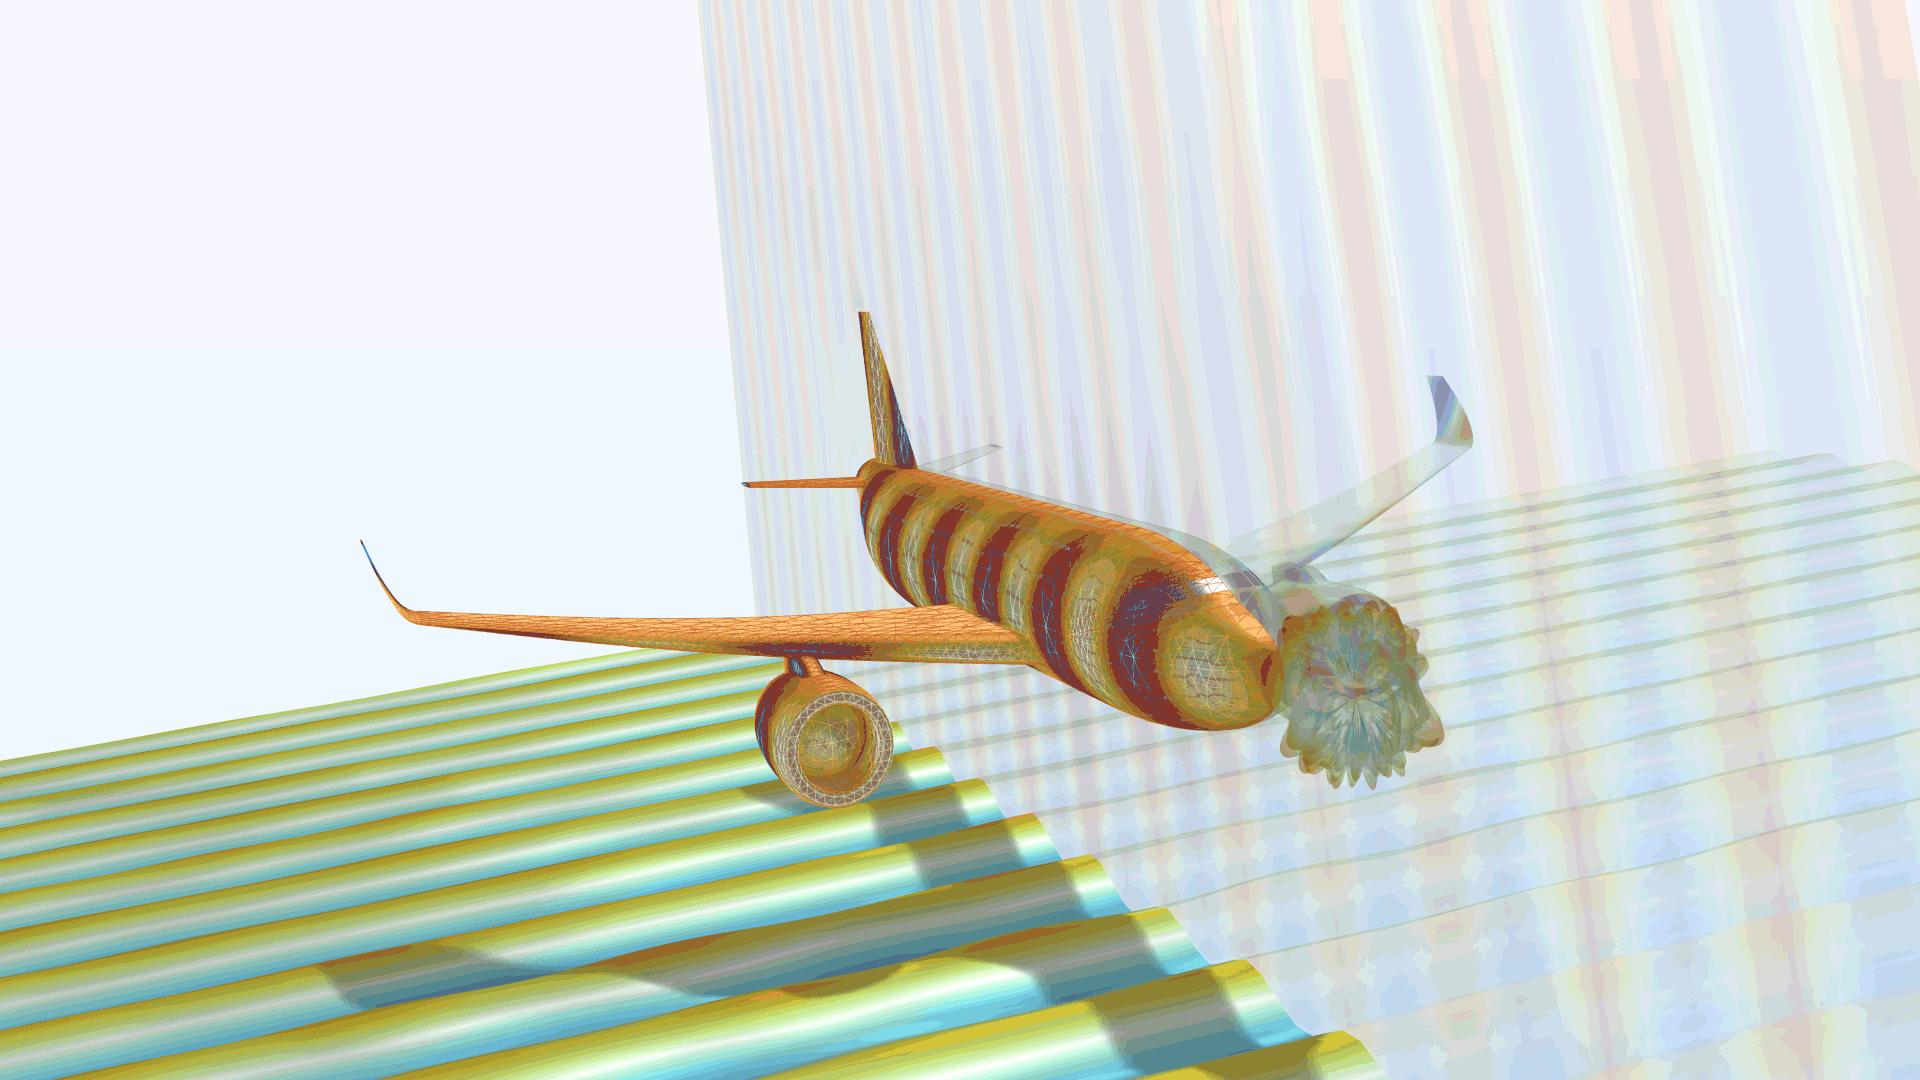 An airplane model showing the bistatic radar cross section in the Thermal Wave color table.